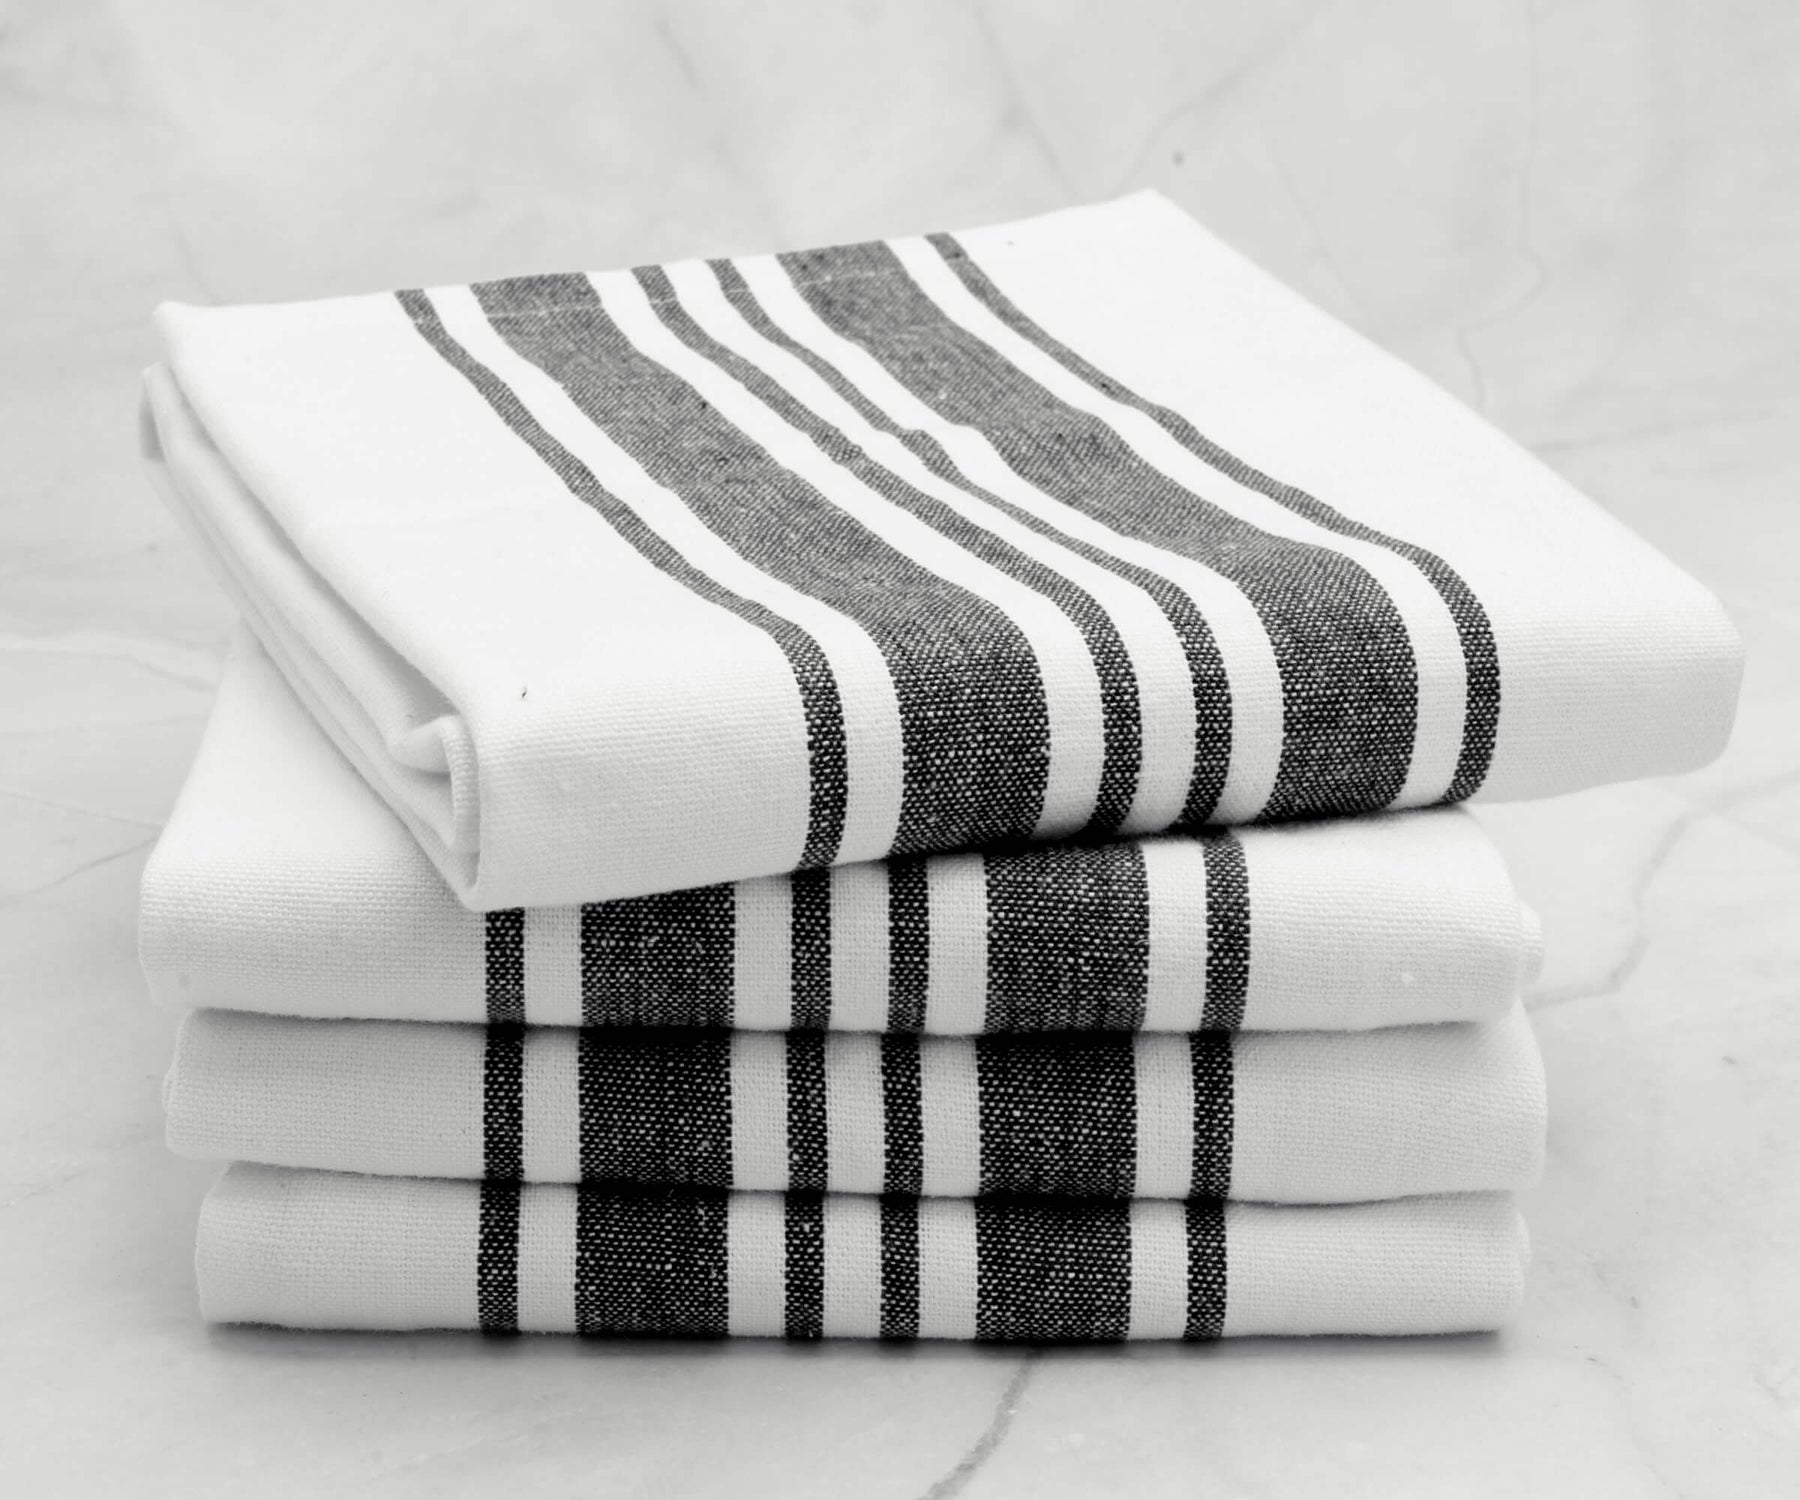 Neatly stacked black and white striped kitchen towels